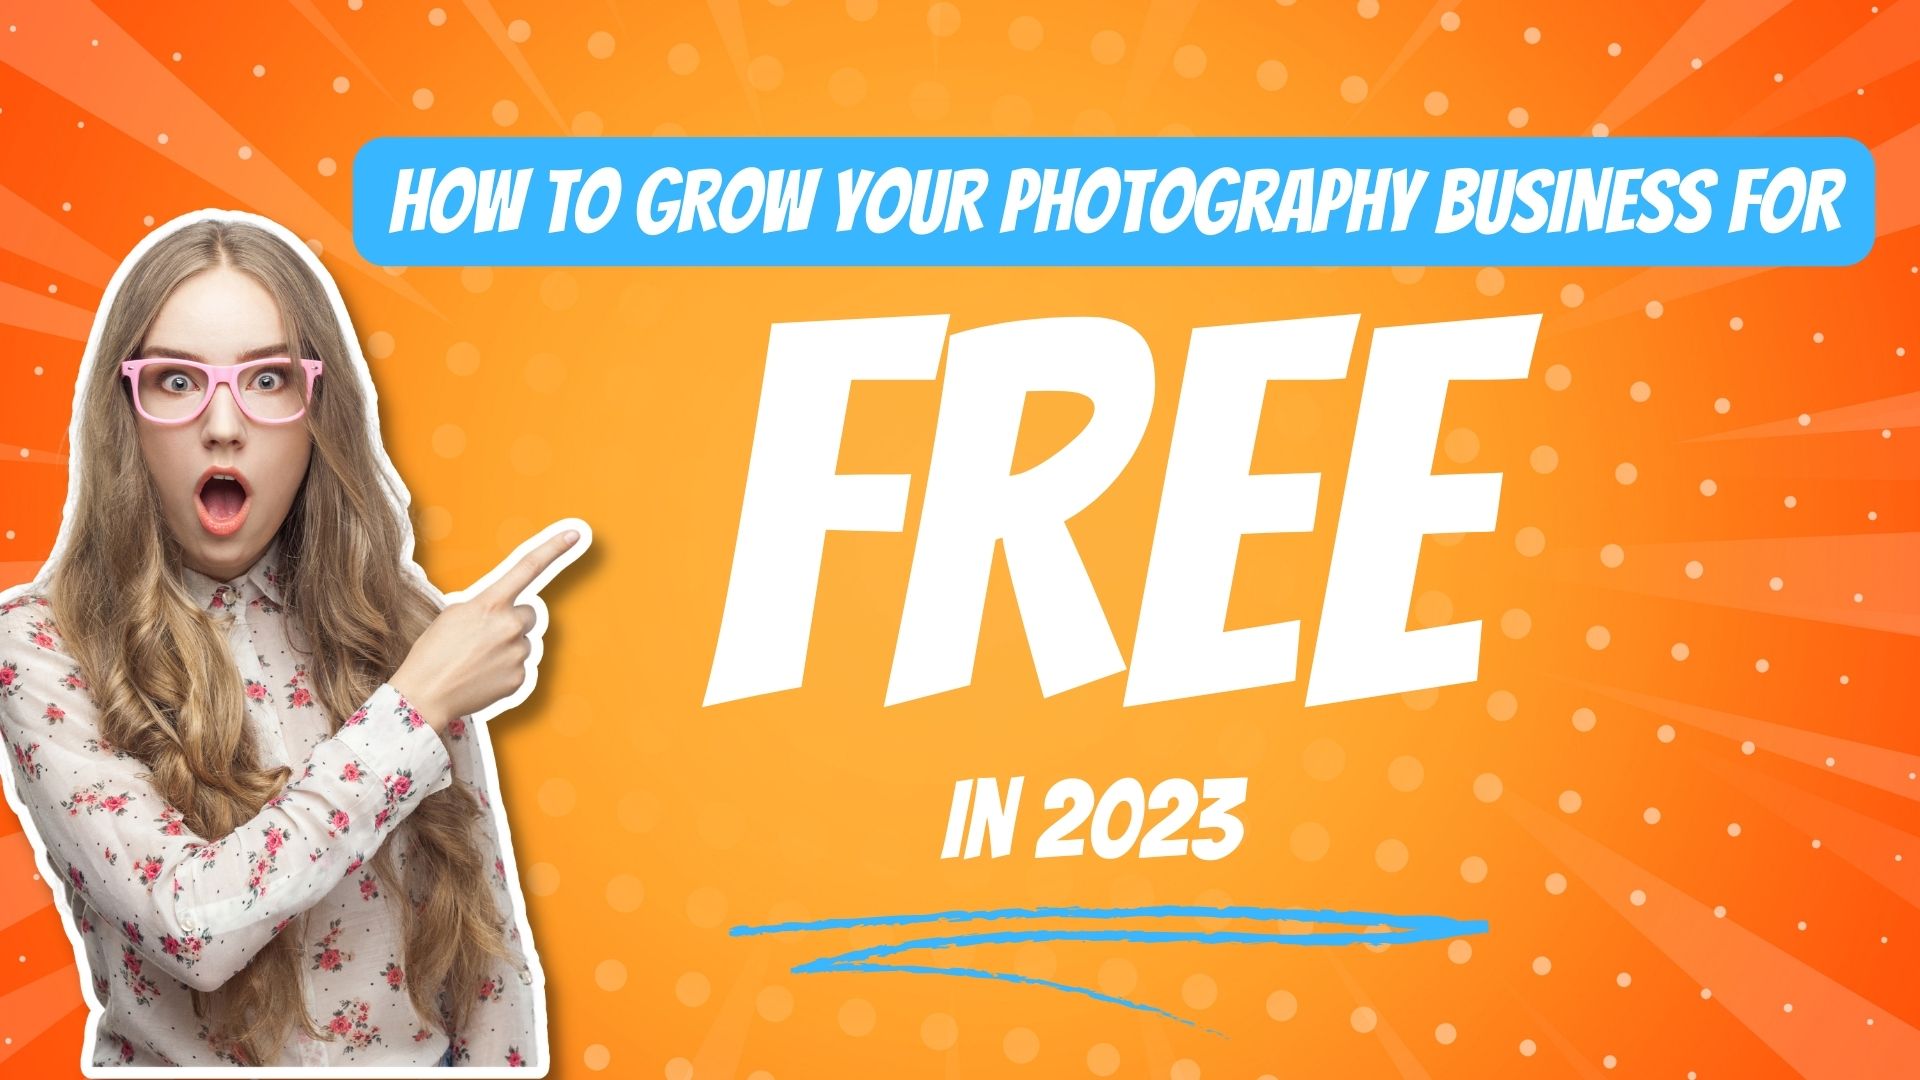 How to grow your photography business for free in 2023